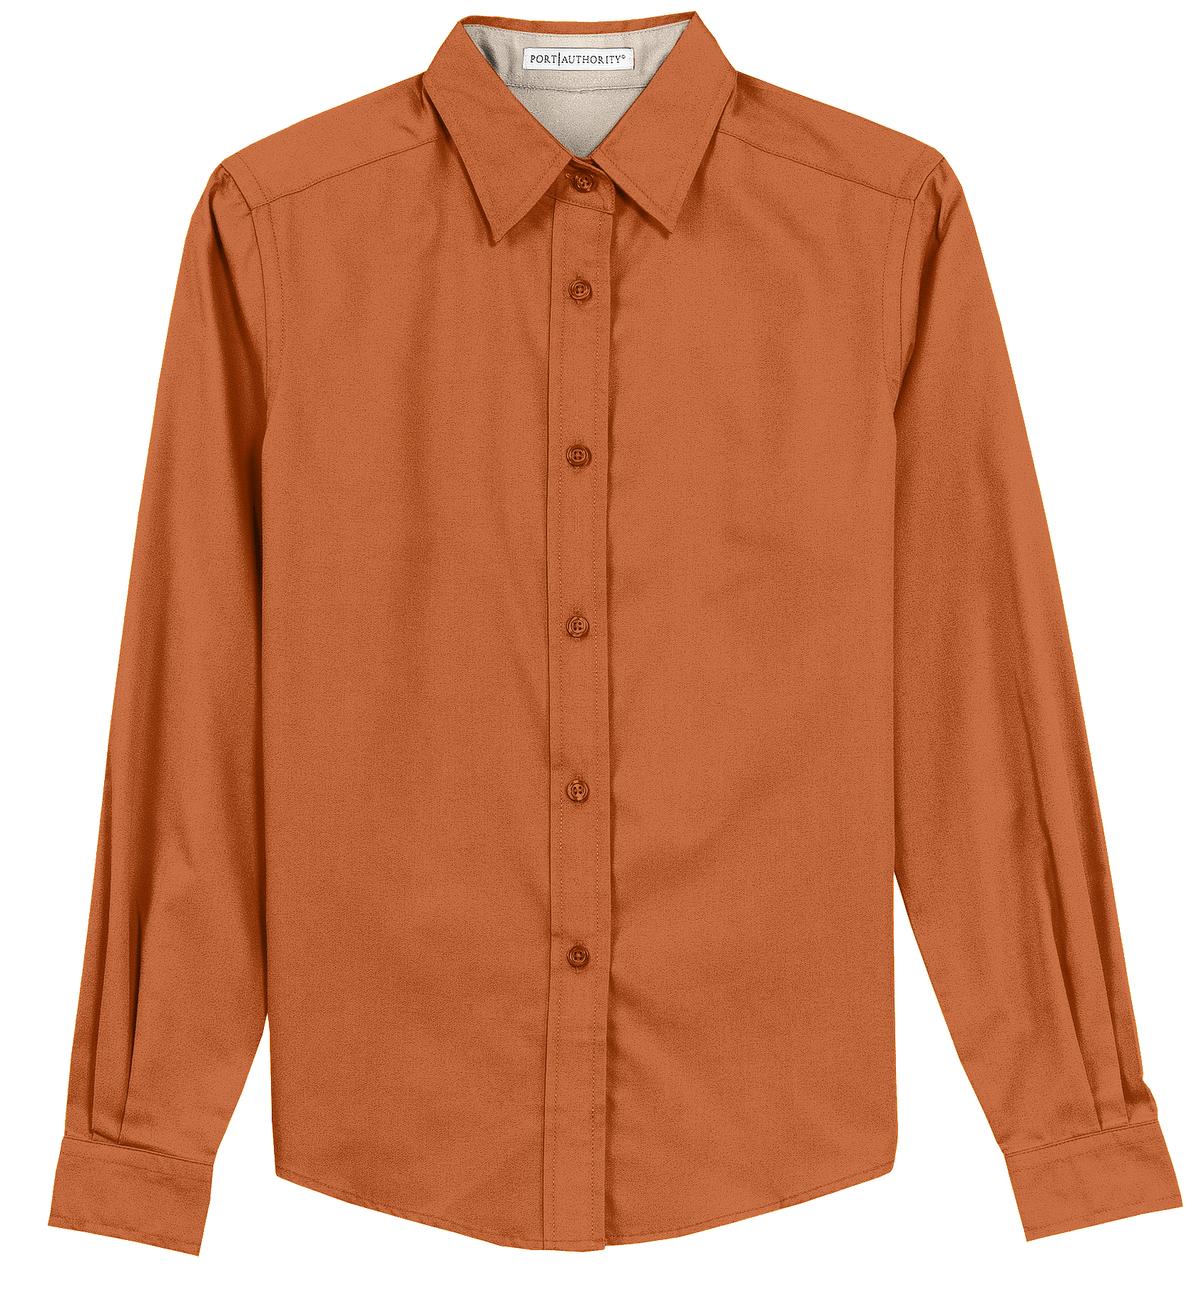 Port Authority ® Ladies Long Sleeve Easy Care Shirt. L608 - image 5 of 6